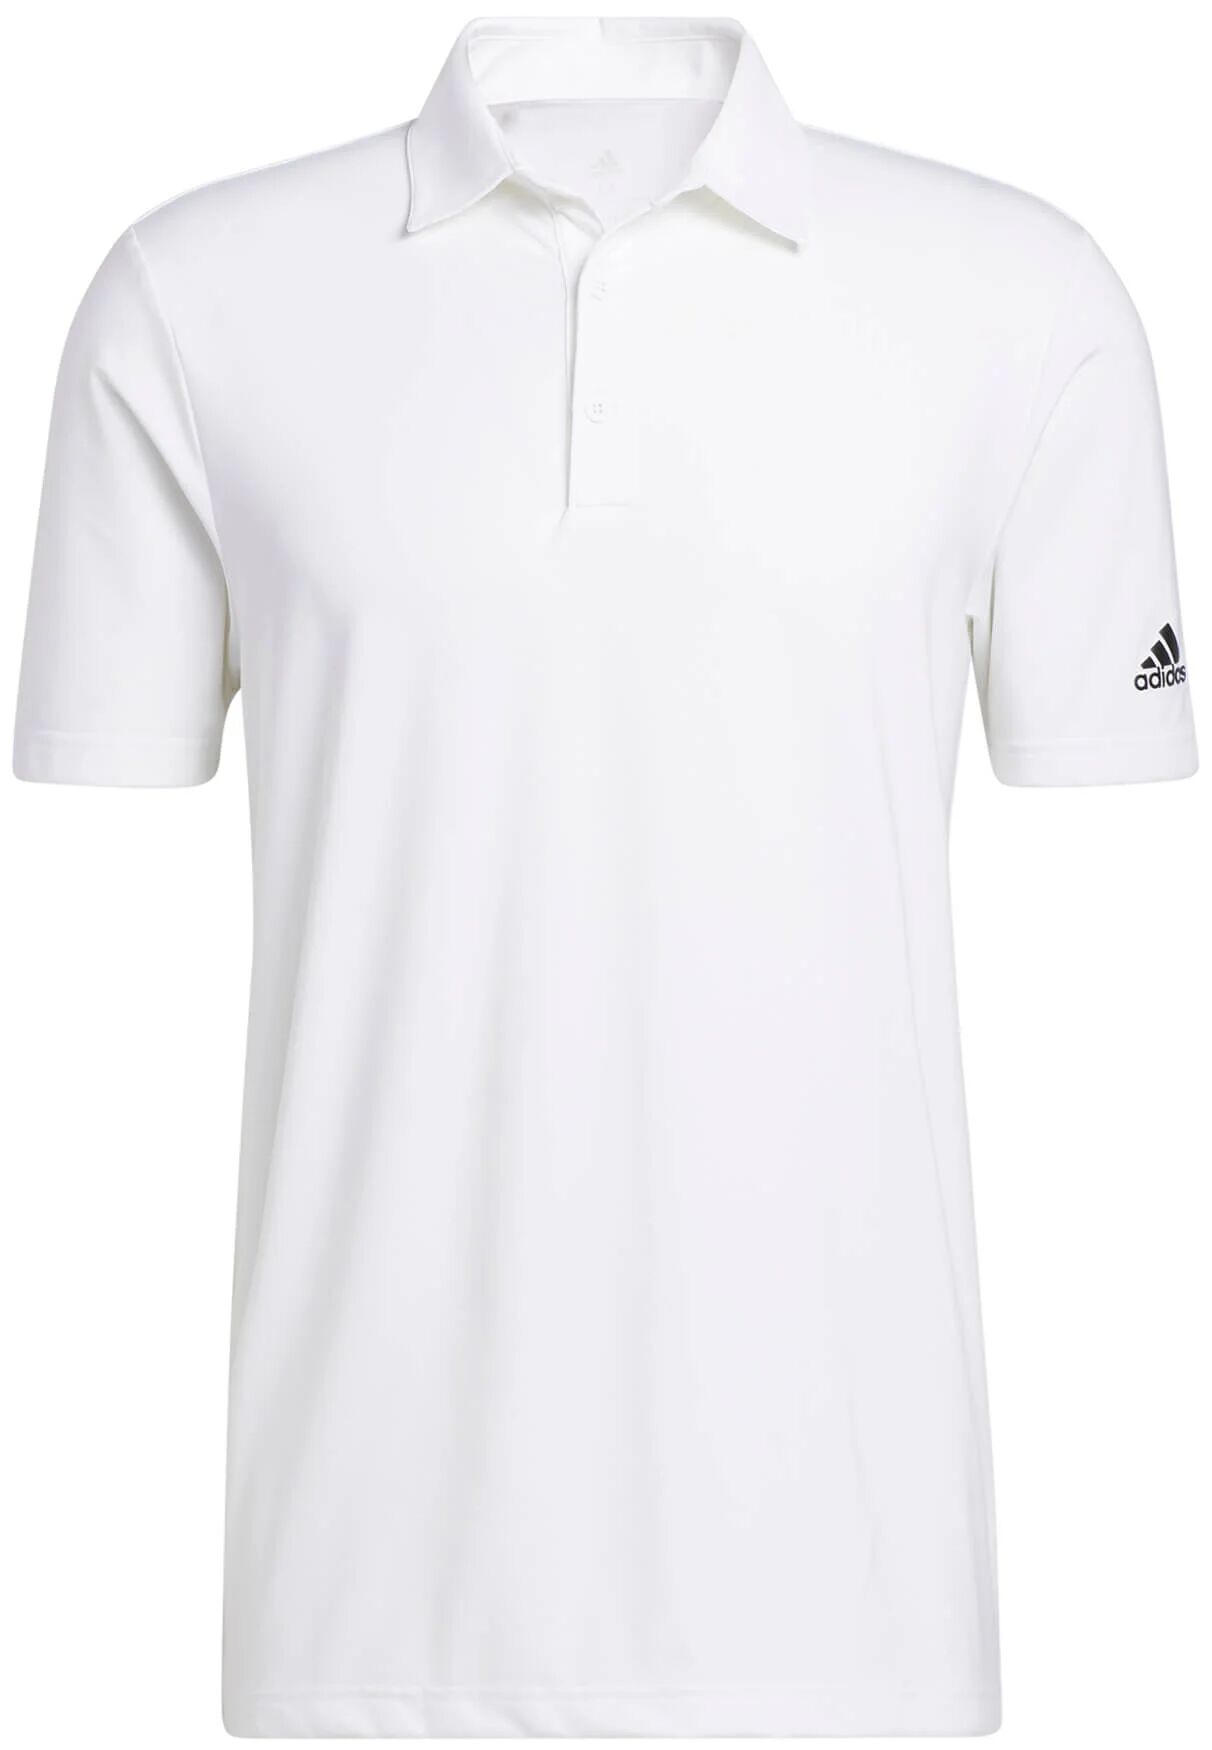 adidas Ultimate 365 Solid Men's Golf Polo Shirt - White, Size: Large